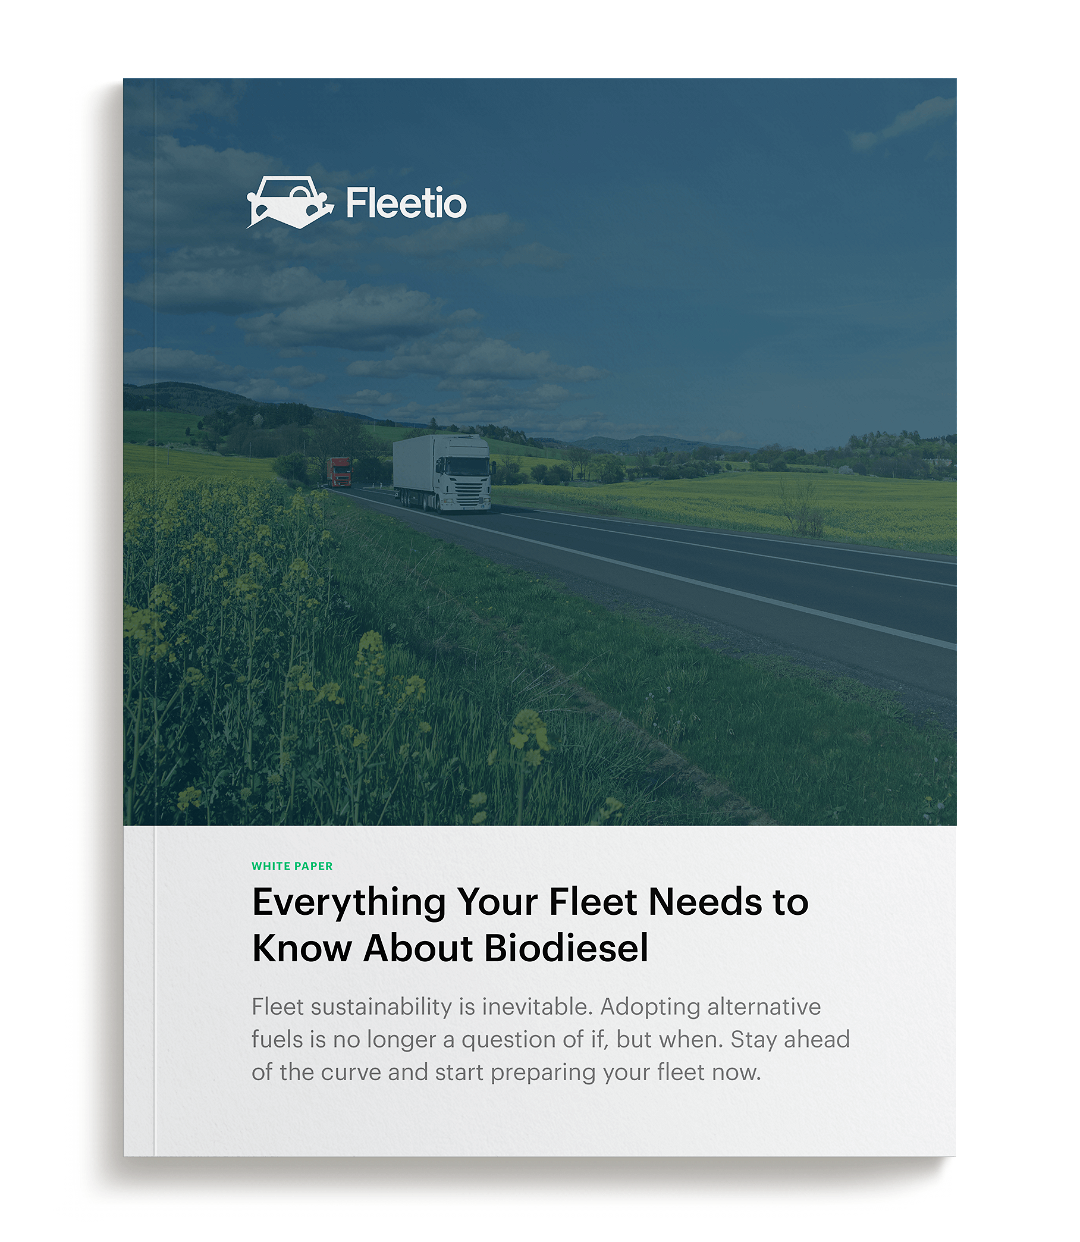 Everything Your Fleet Needs to Know About Biodiesel